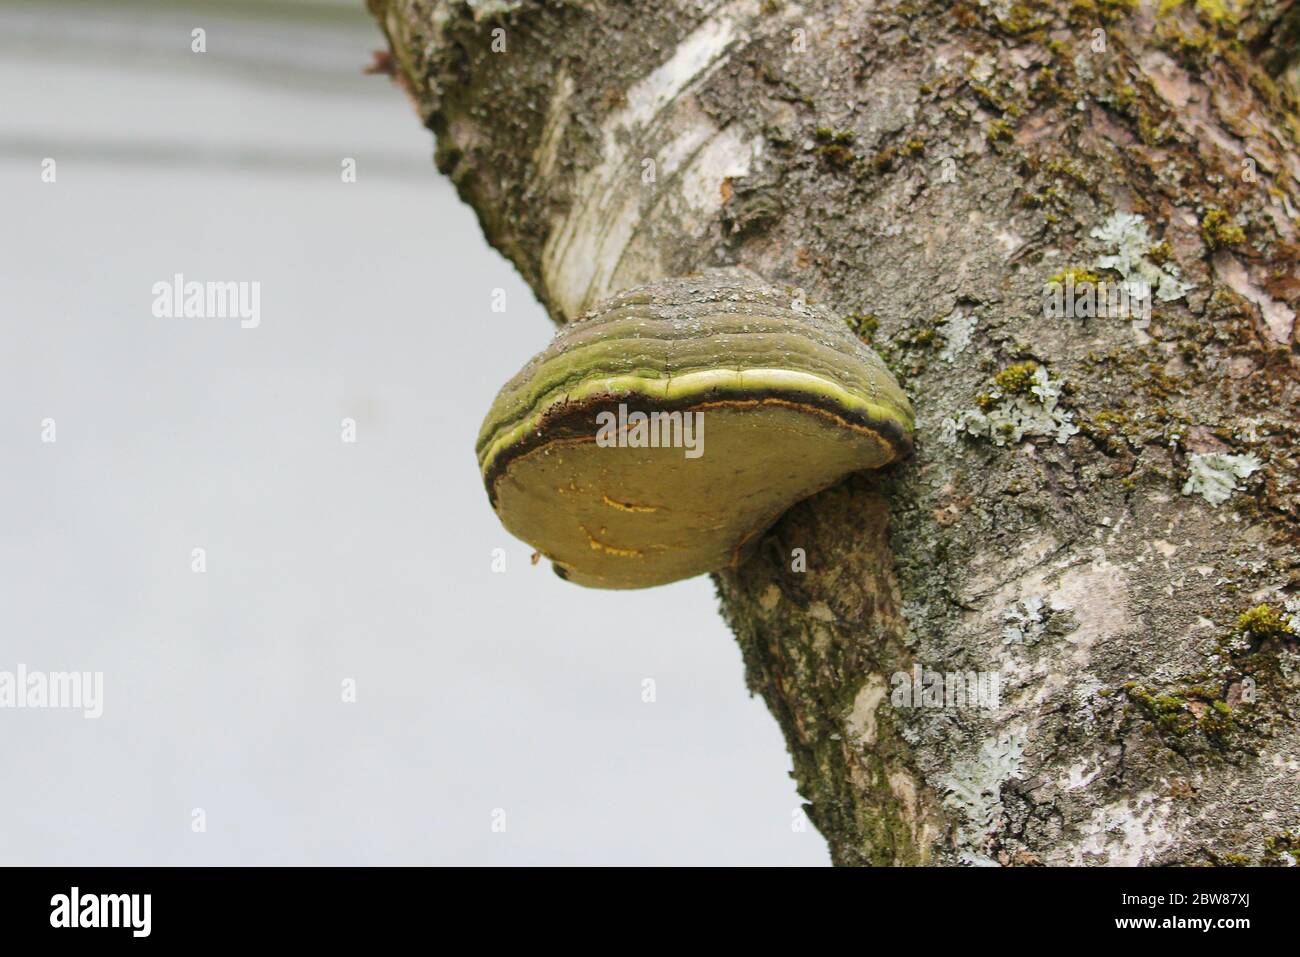 A wood mushroom on the trunk of a birch tree. Parasitic fungus on a tree. Texture of bark and moss. Stock Photo